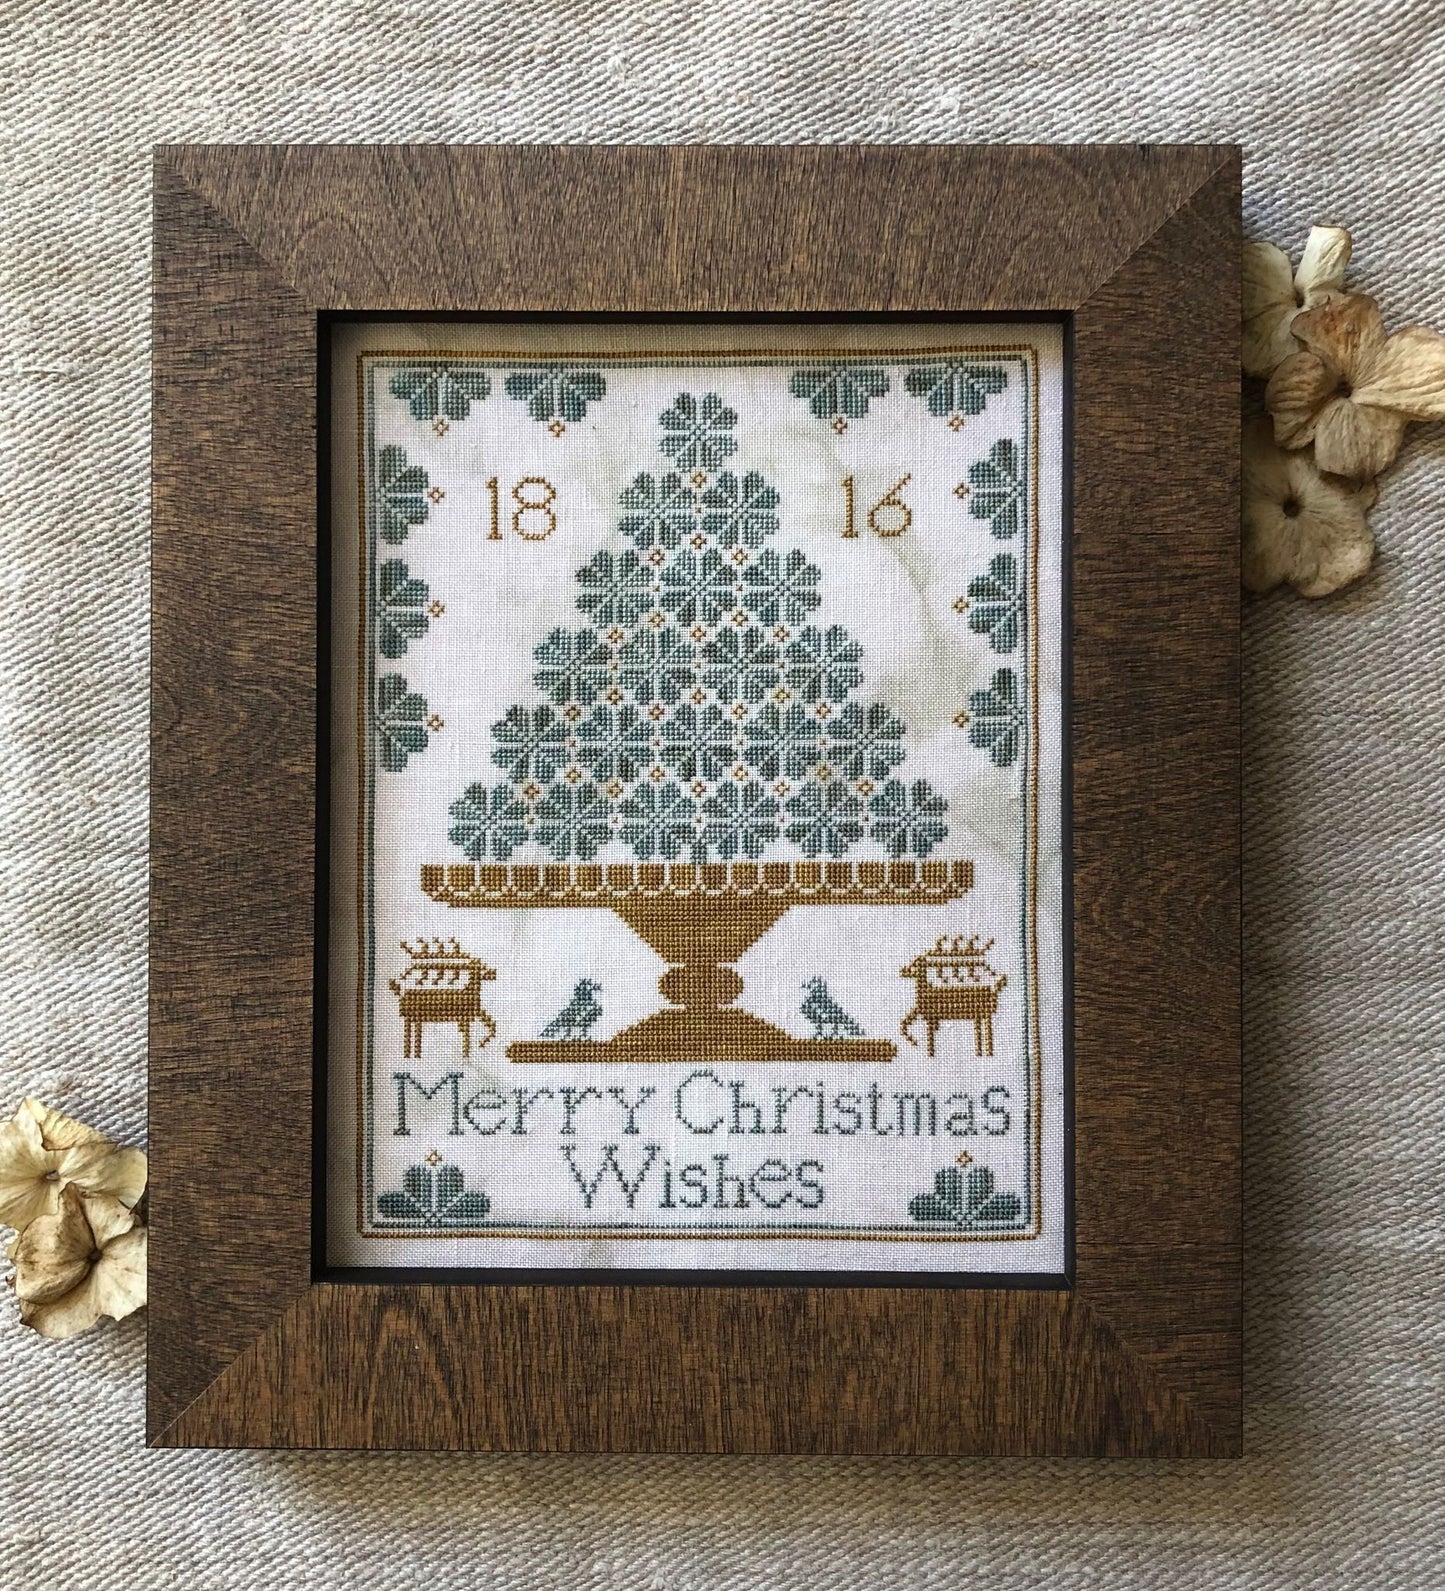 Merry Christmas Wishes - Cross Stitch Pattern by Kathy Barrick